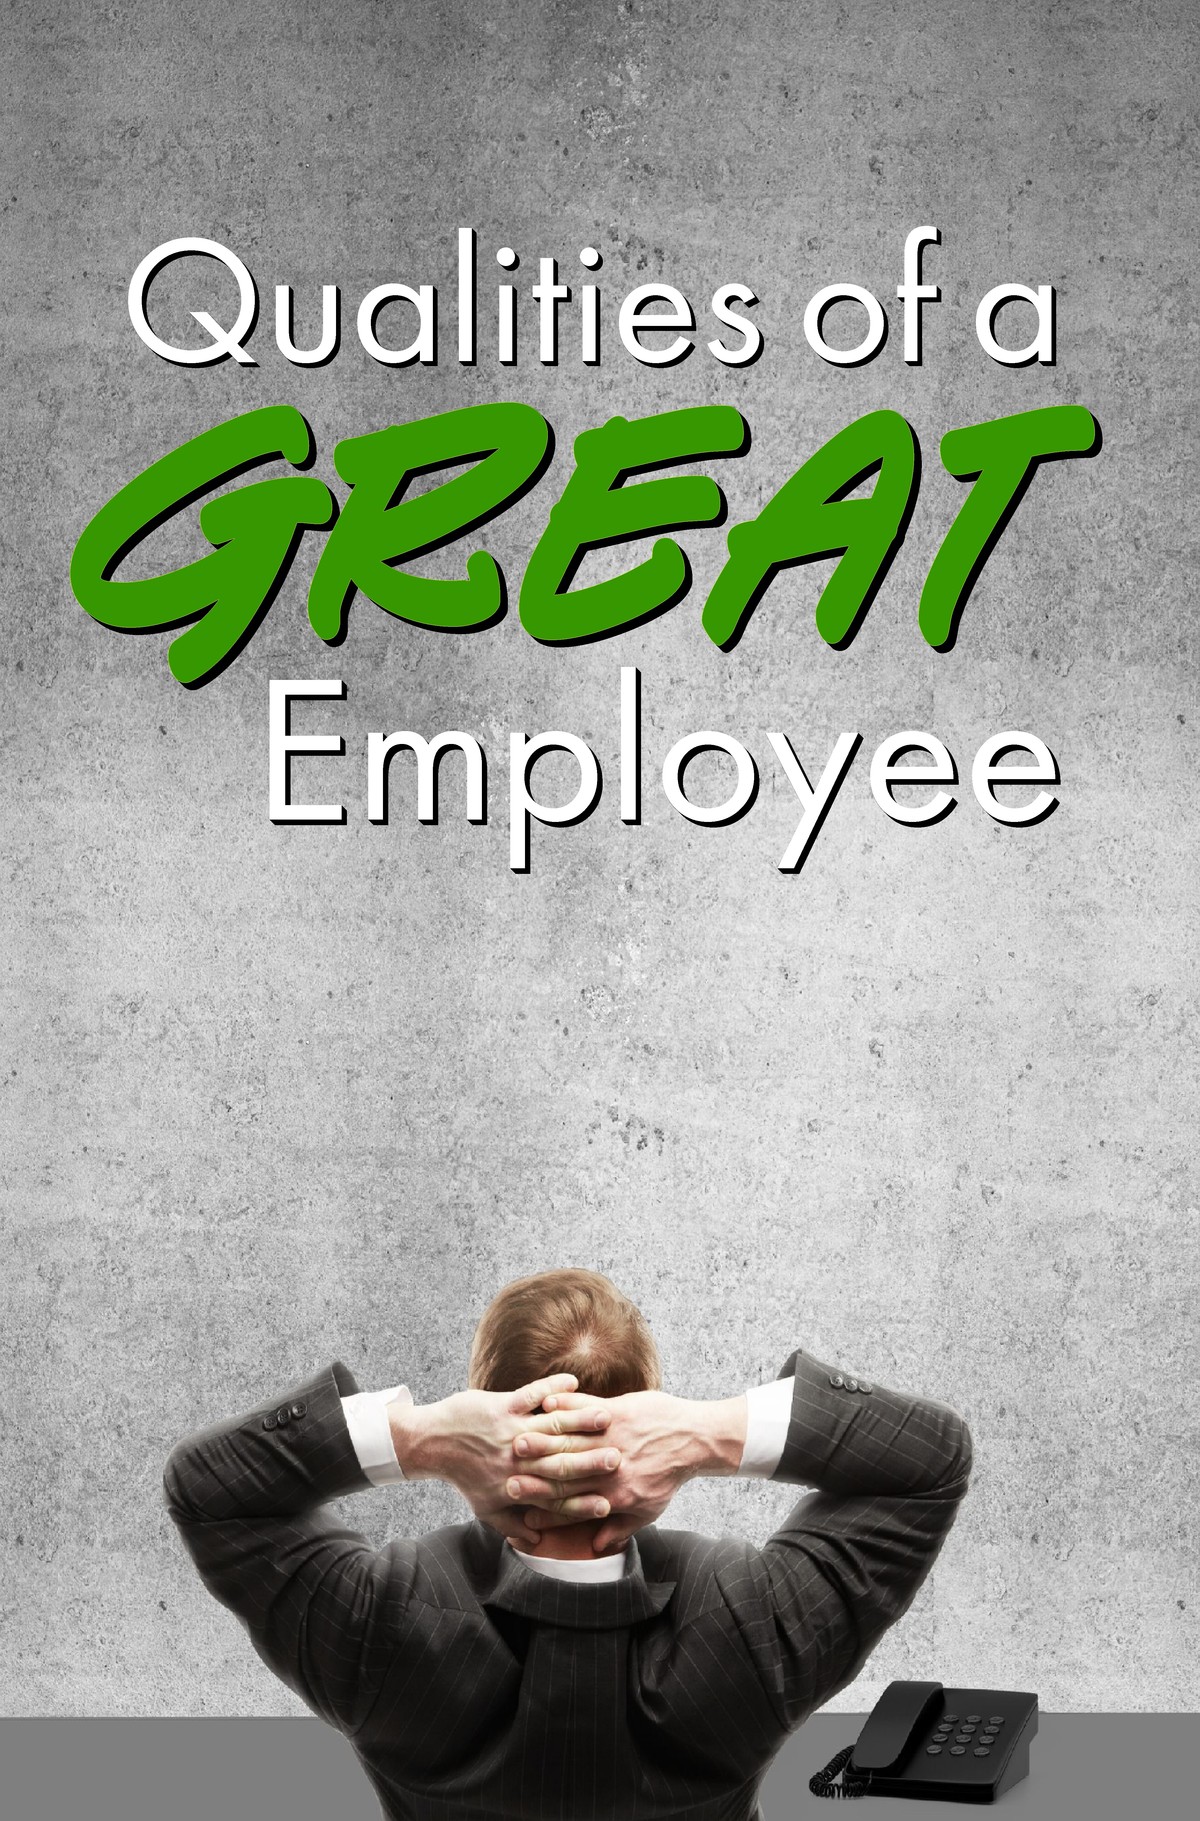 L7023 - Qualities of a Great Employee